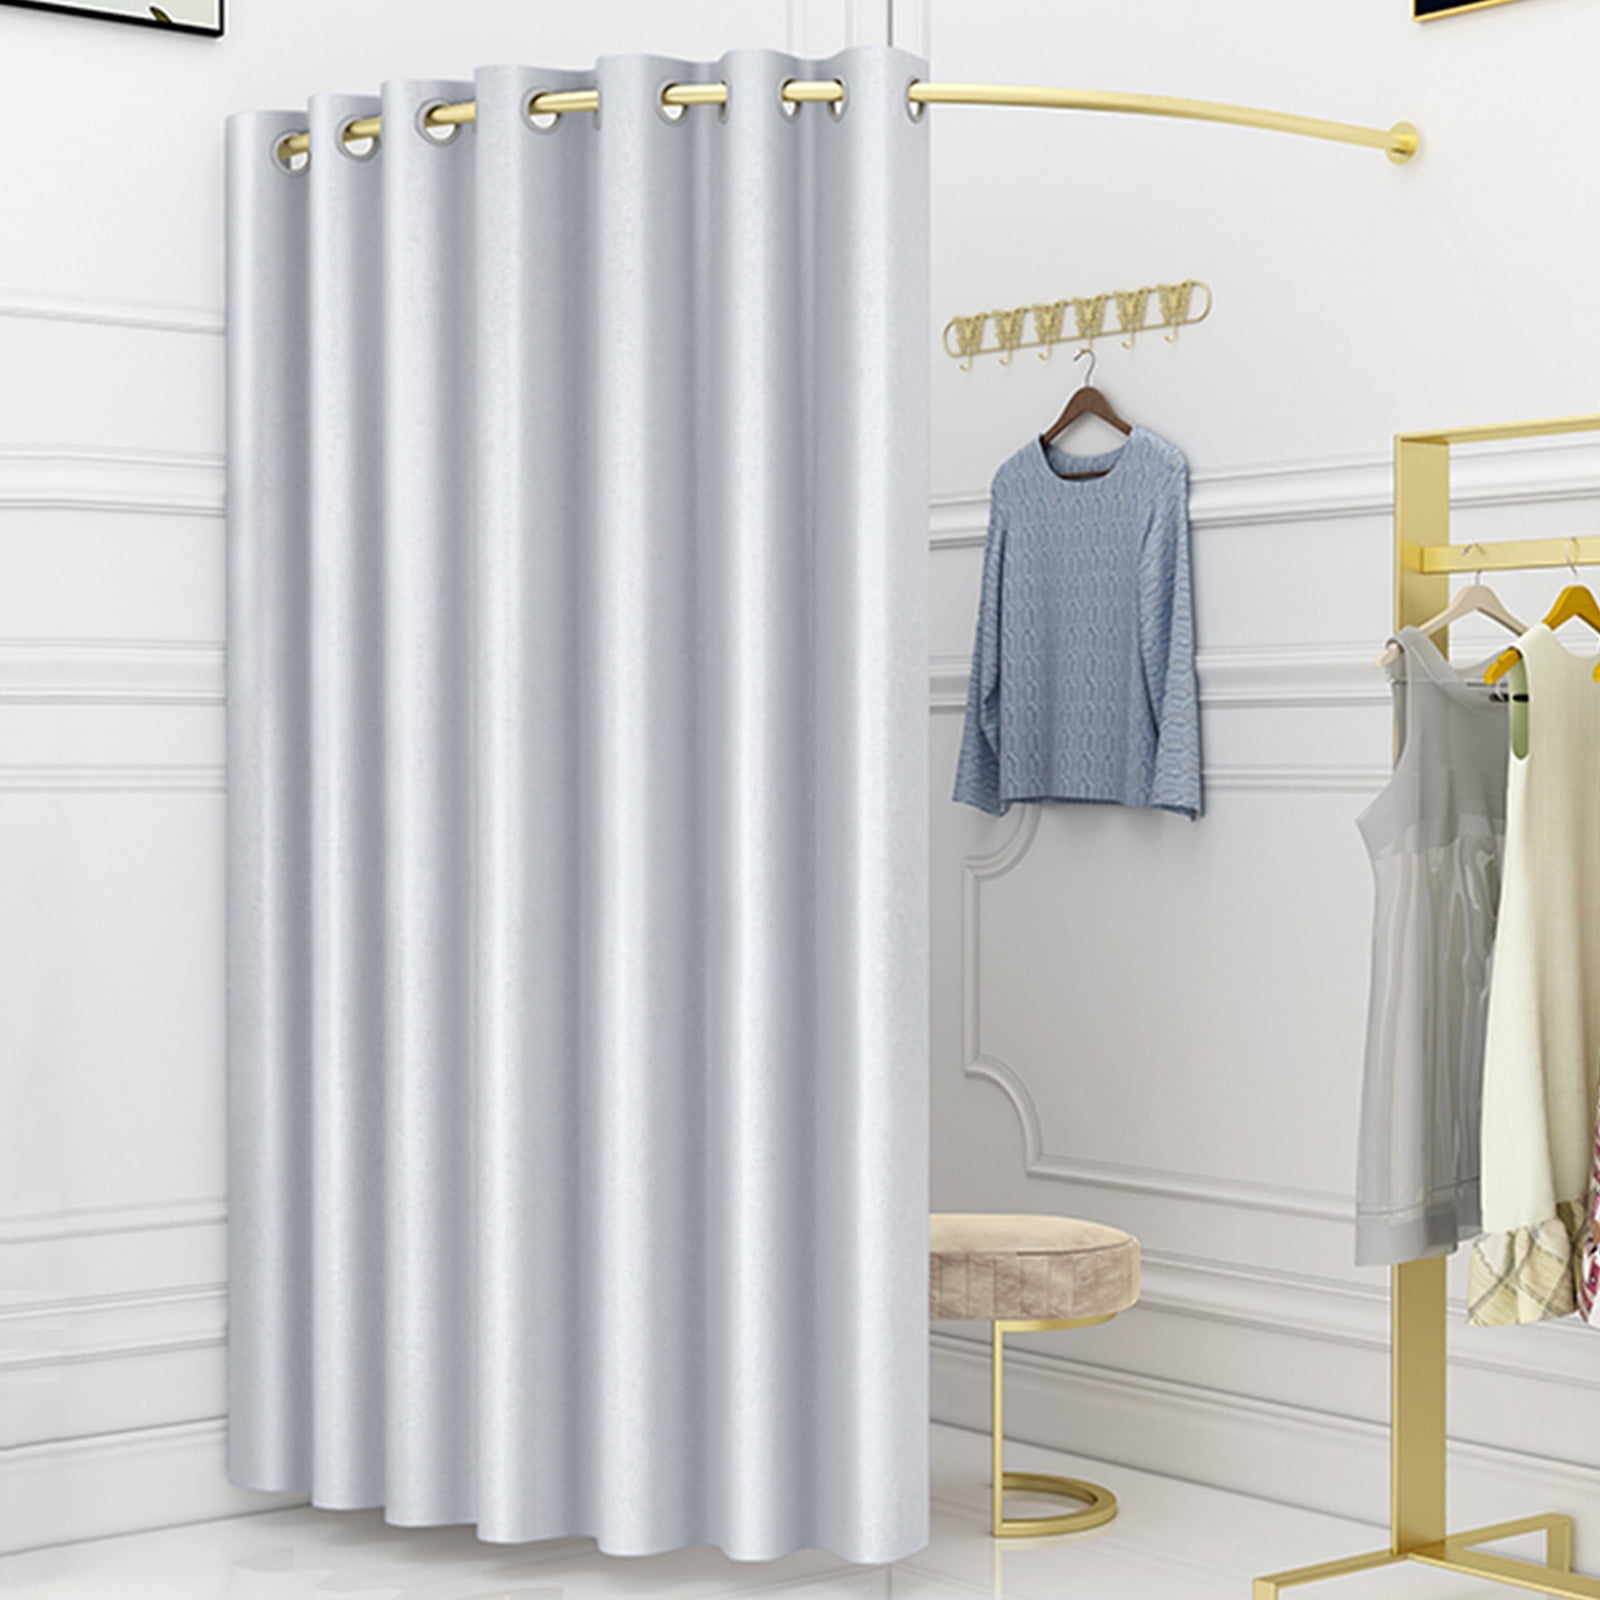  MORN Fitting Room, 43x43x78 inch Clothing Store